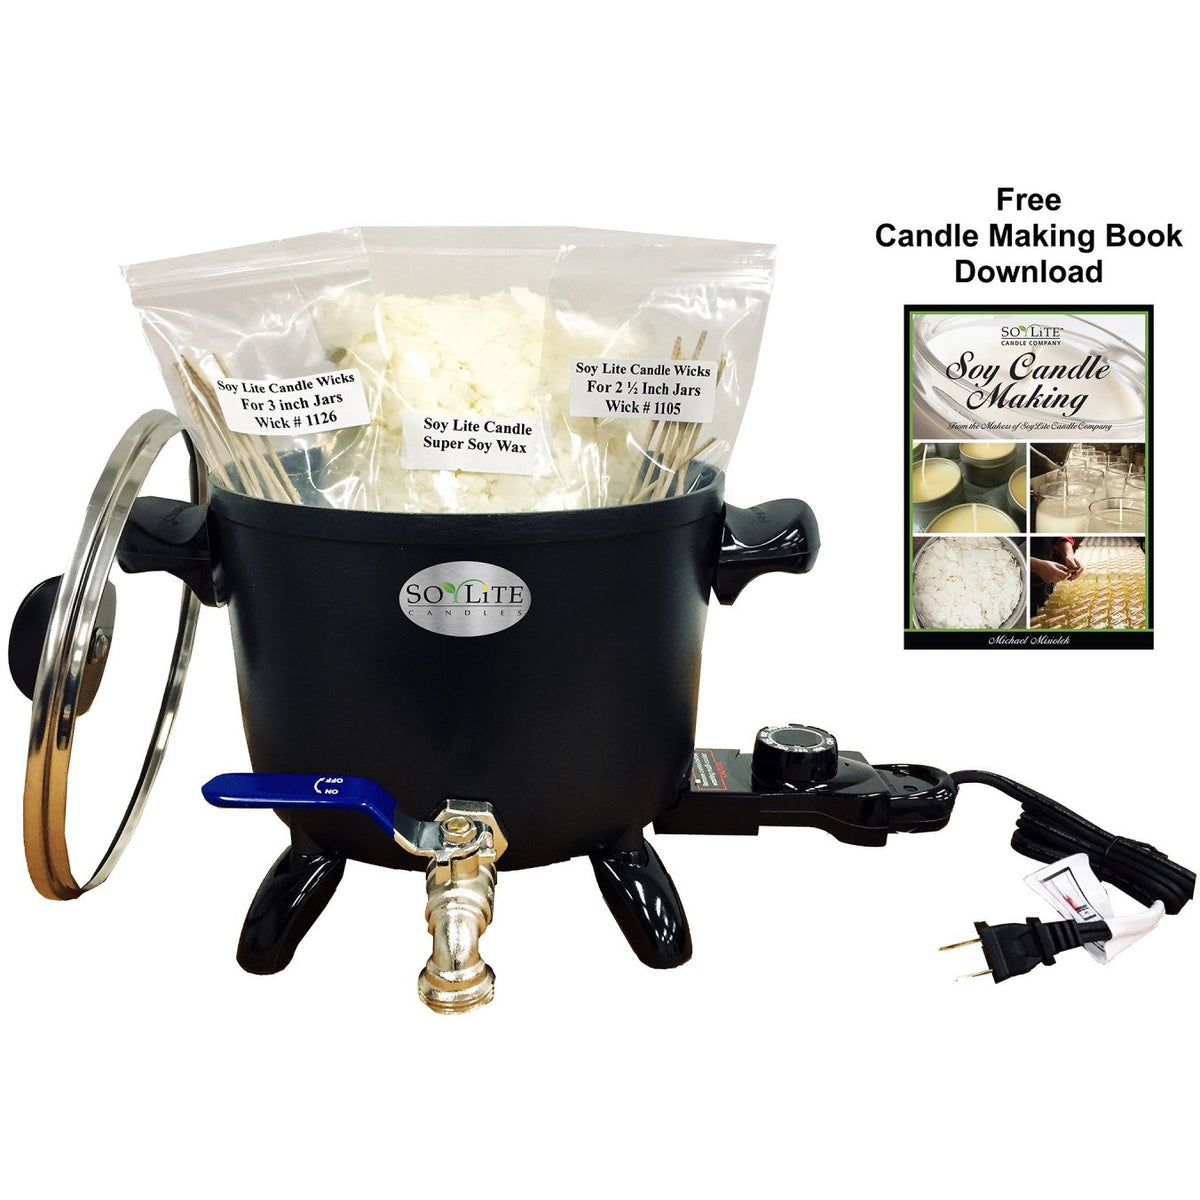 Wax Melter Kit – Soy Lite Candle Supplies